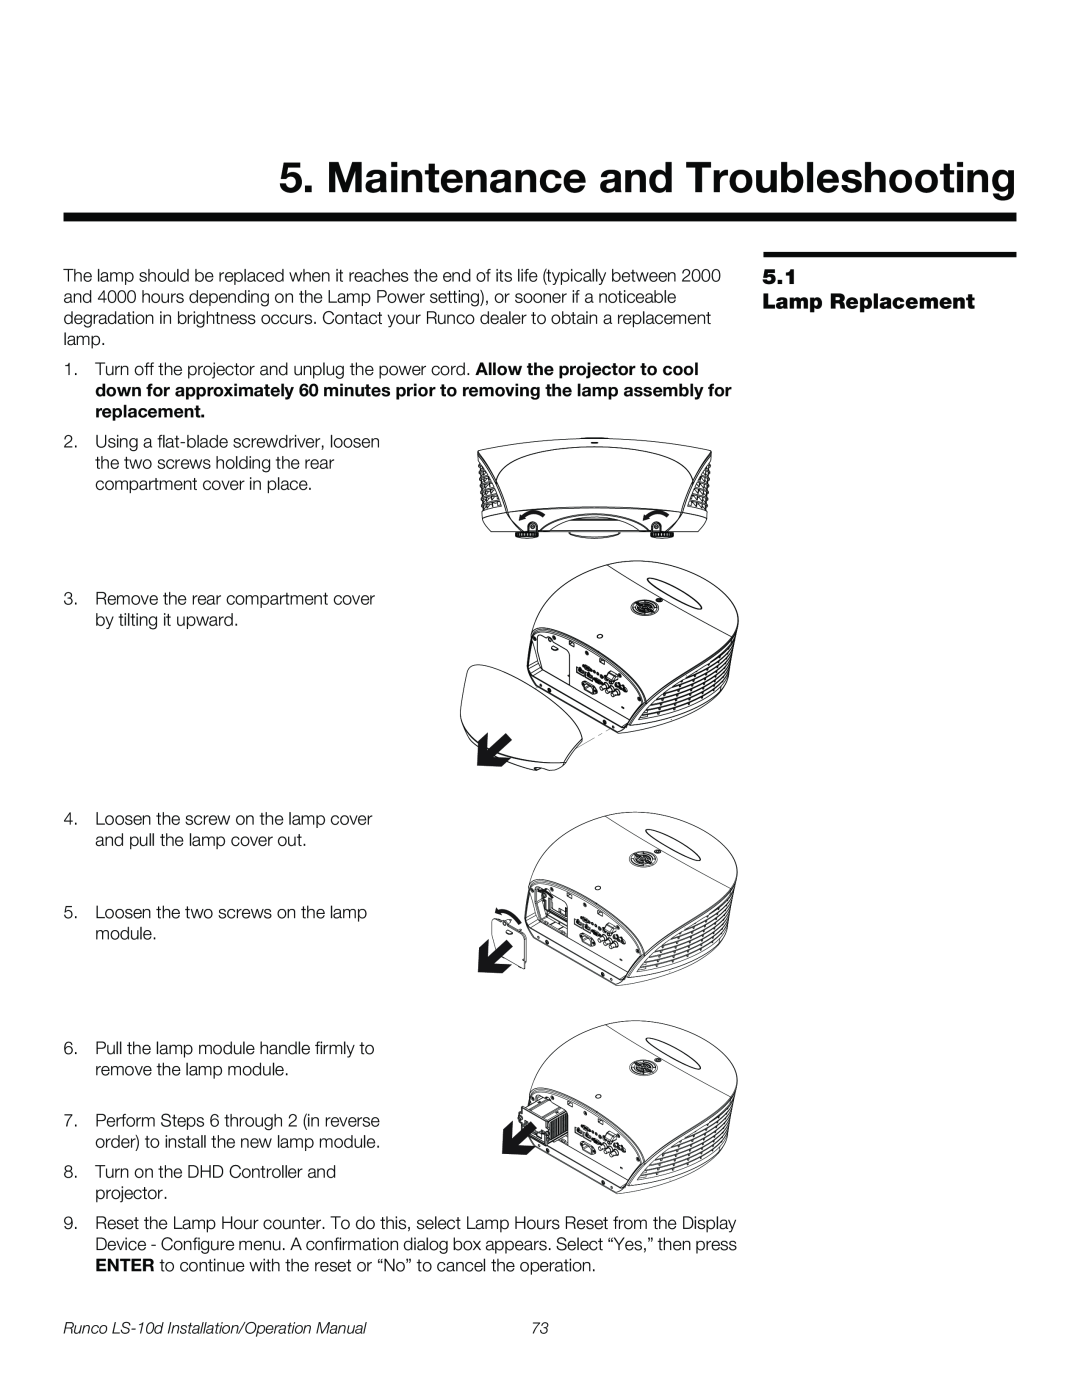 Runco LS-10D operation manual Maintenance and Troubleshooting, Lamp Replacement 